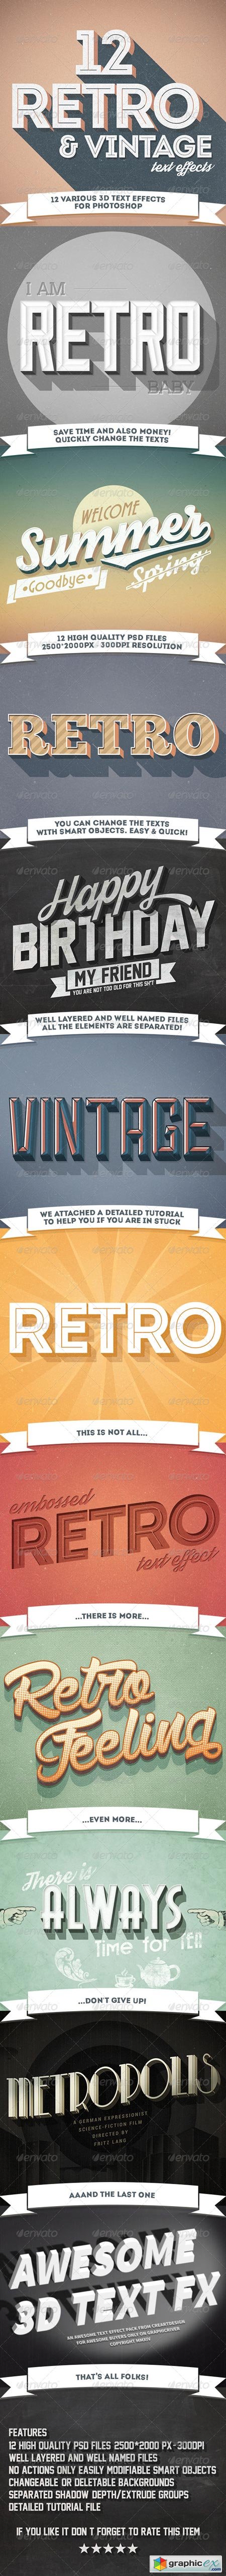 12 Various 3D Retro & Vintage Text Effects Pack 7332894